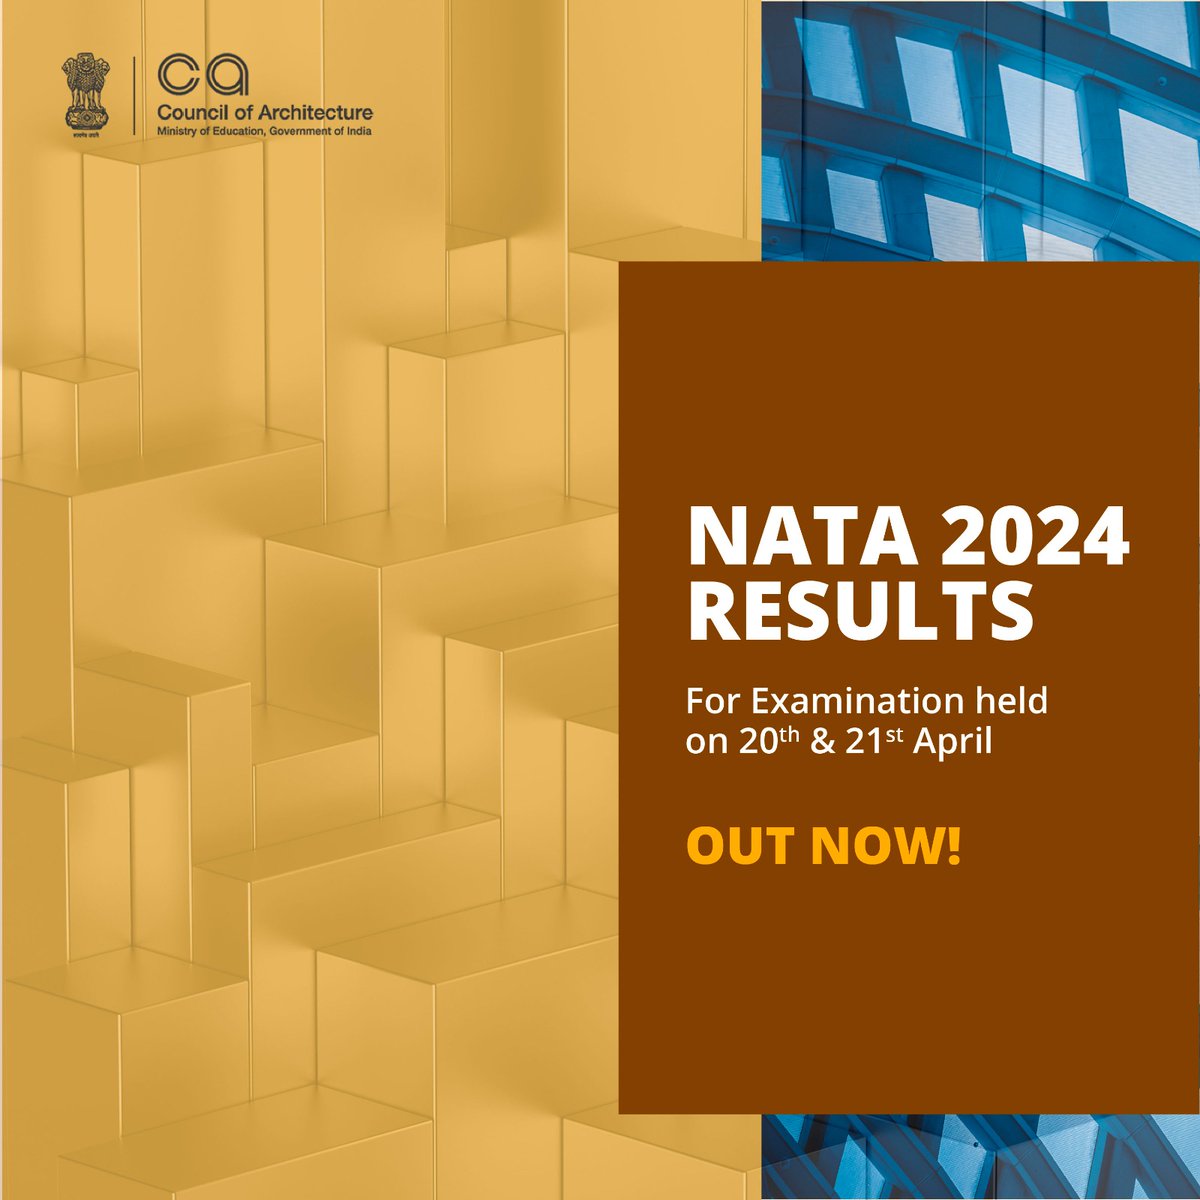 Aspiring #architects, rejoice!  The results for the #NATA exam held on April 20th & 21st are finally out!

Ready to see if you unlocked the door to your architectural dreams?  Head over to the official NATA website to check your scores! 

#NATAResults #councilofarchitecture